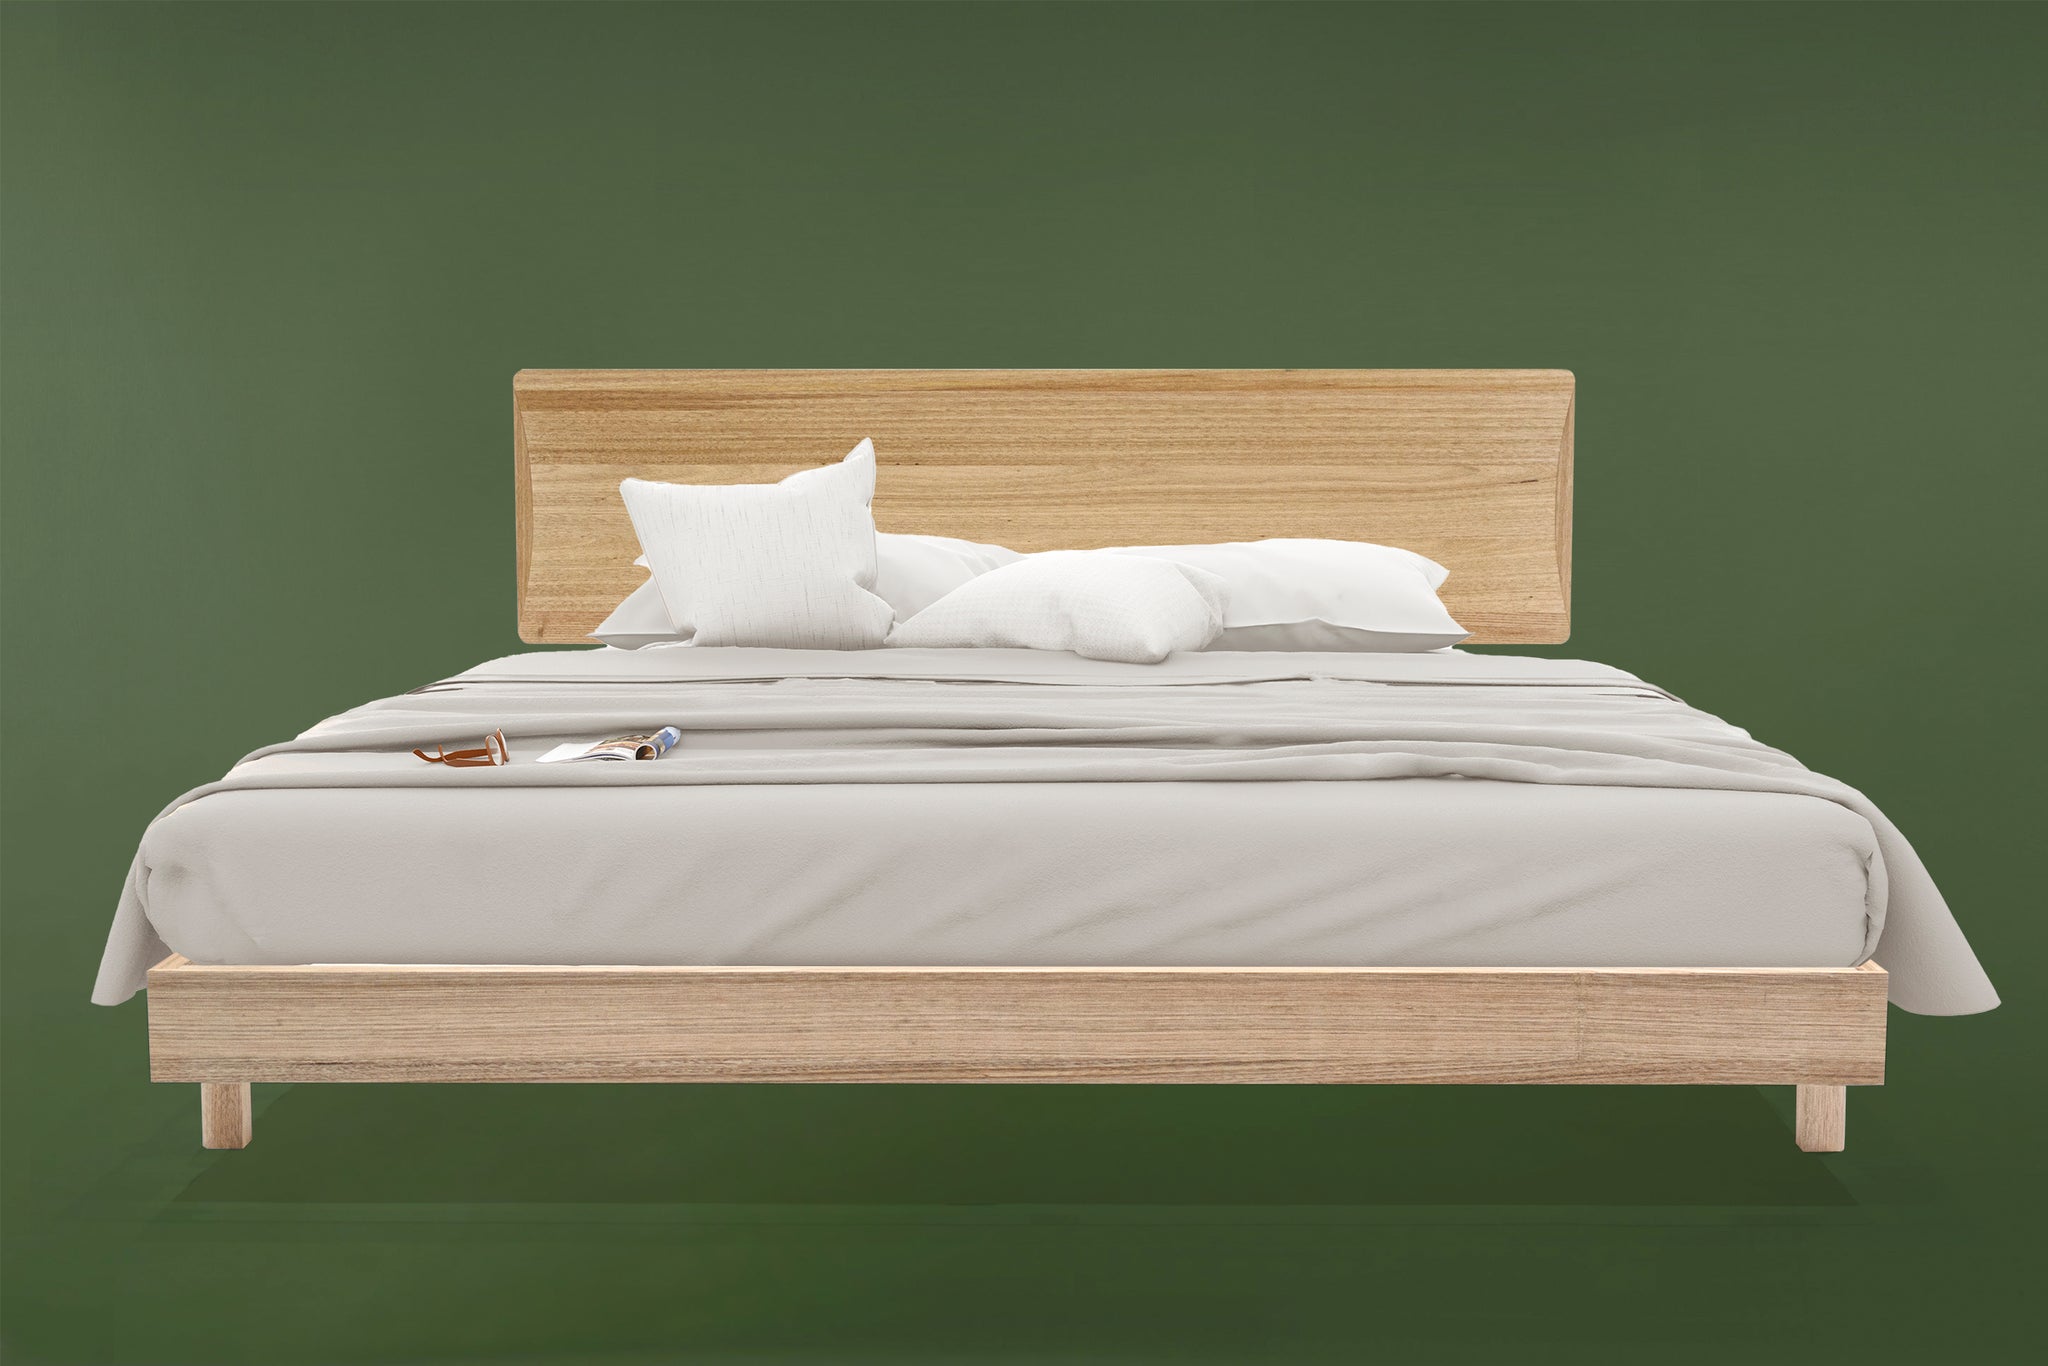 The Bed with Headboard